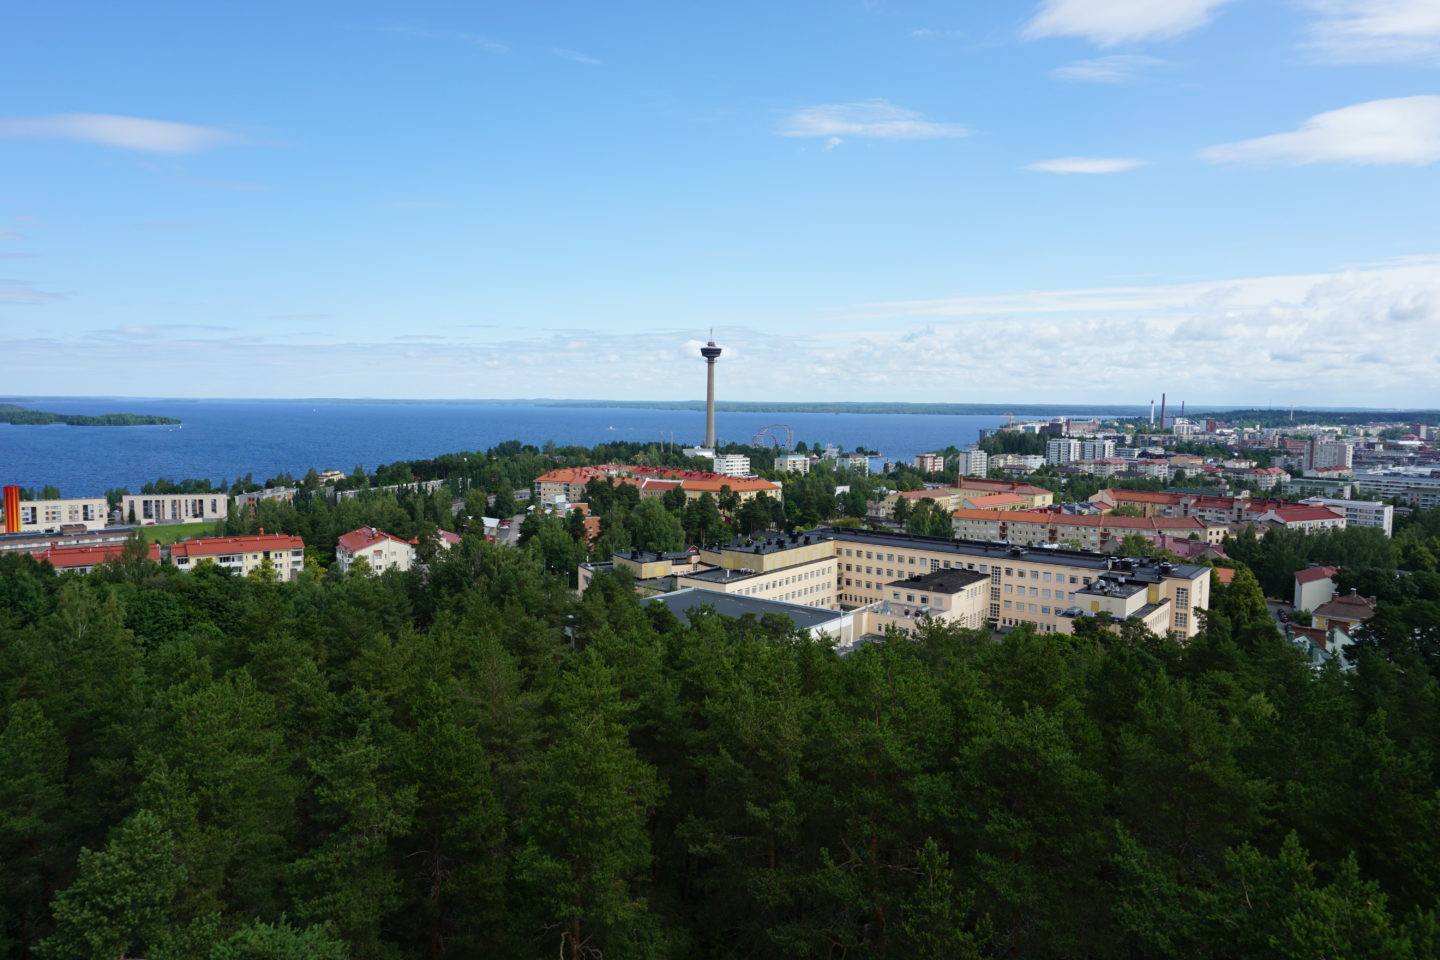 Tampere: Industry & Lakes